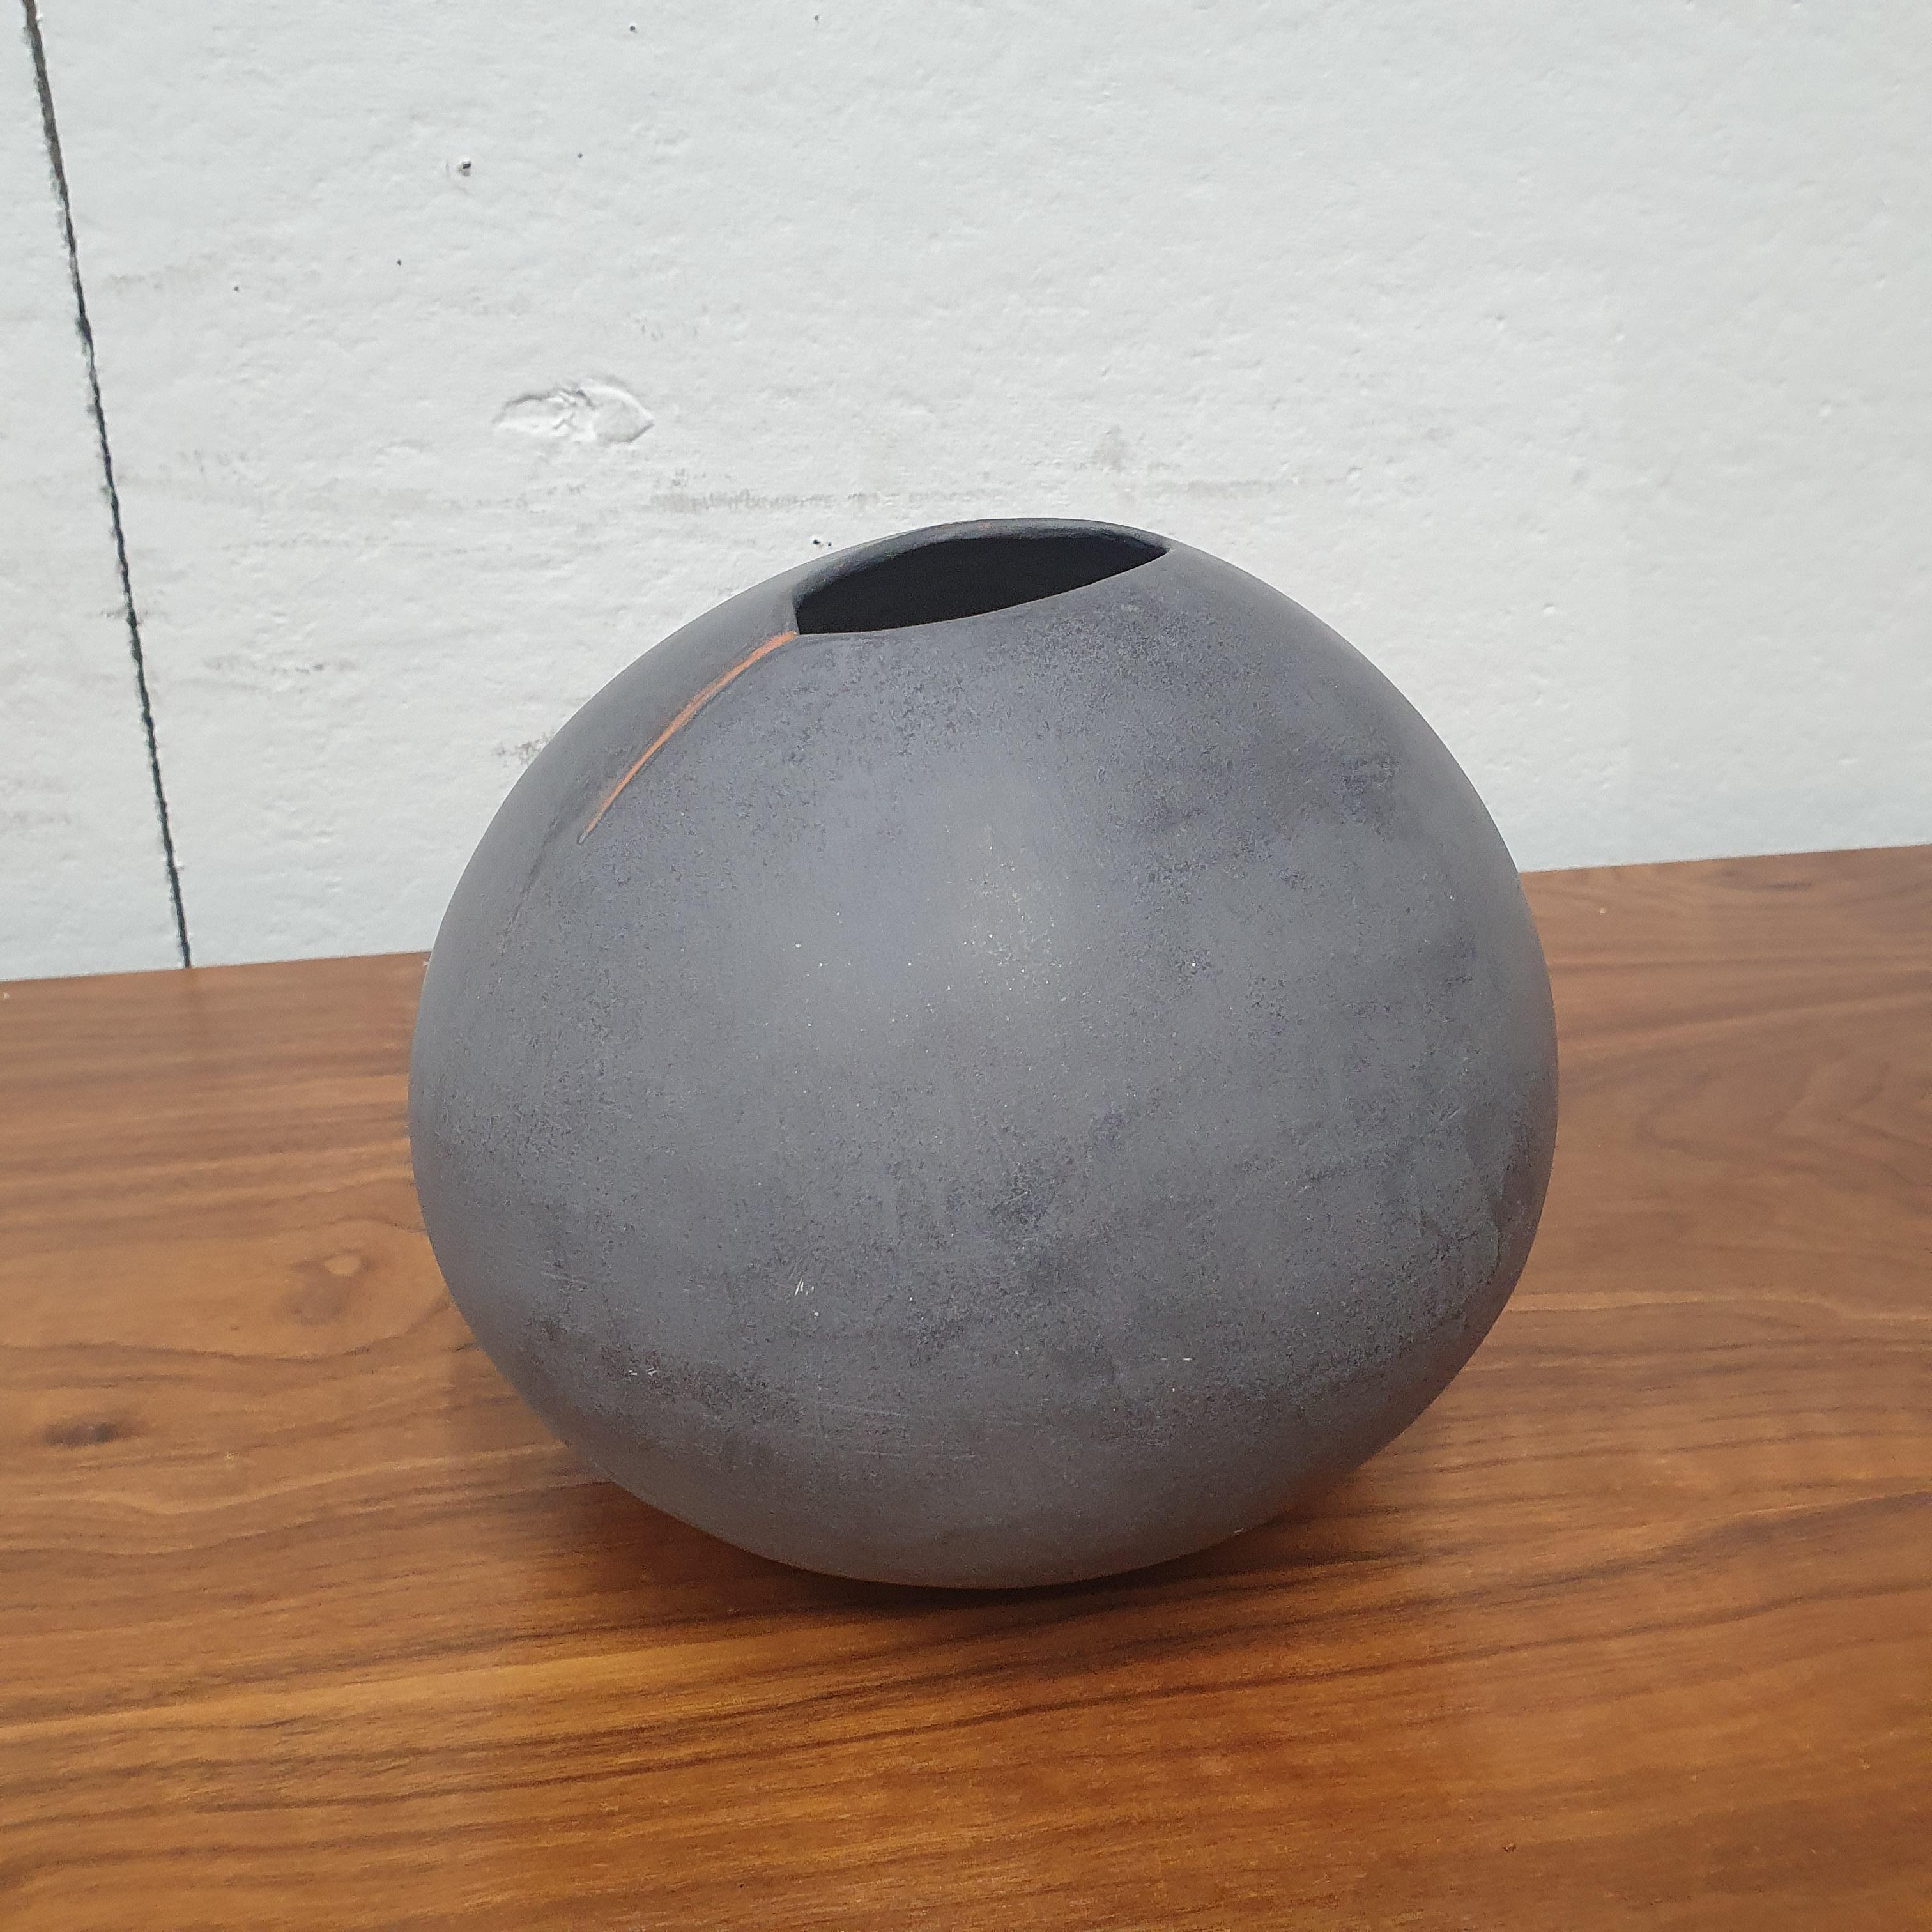 Beautiful gray ceramic vase. Have a great form and a feminine elagance. Signed by artist Wyman rice on underside.